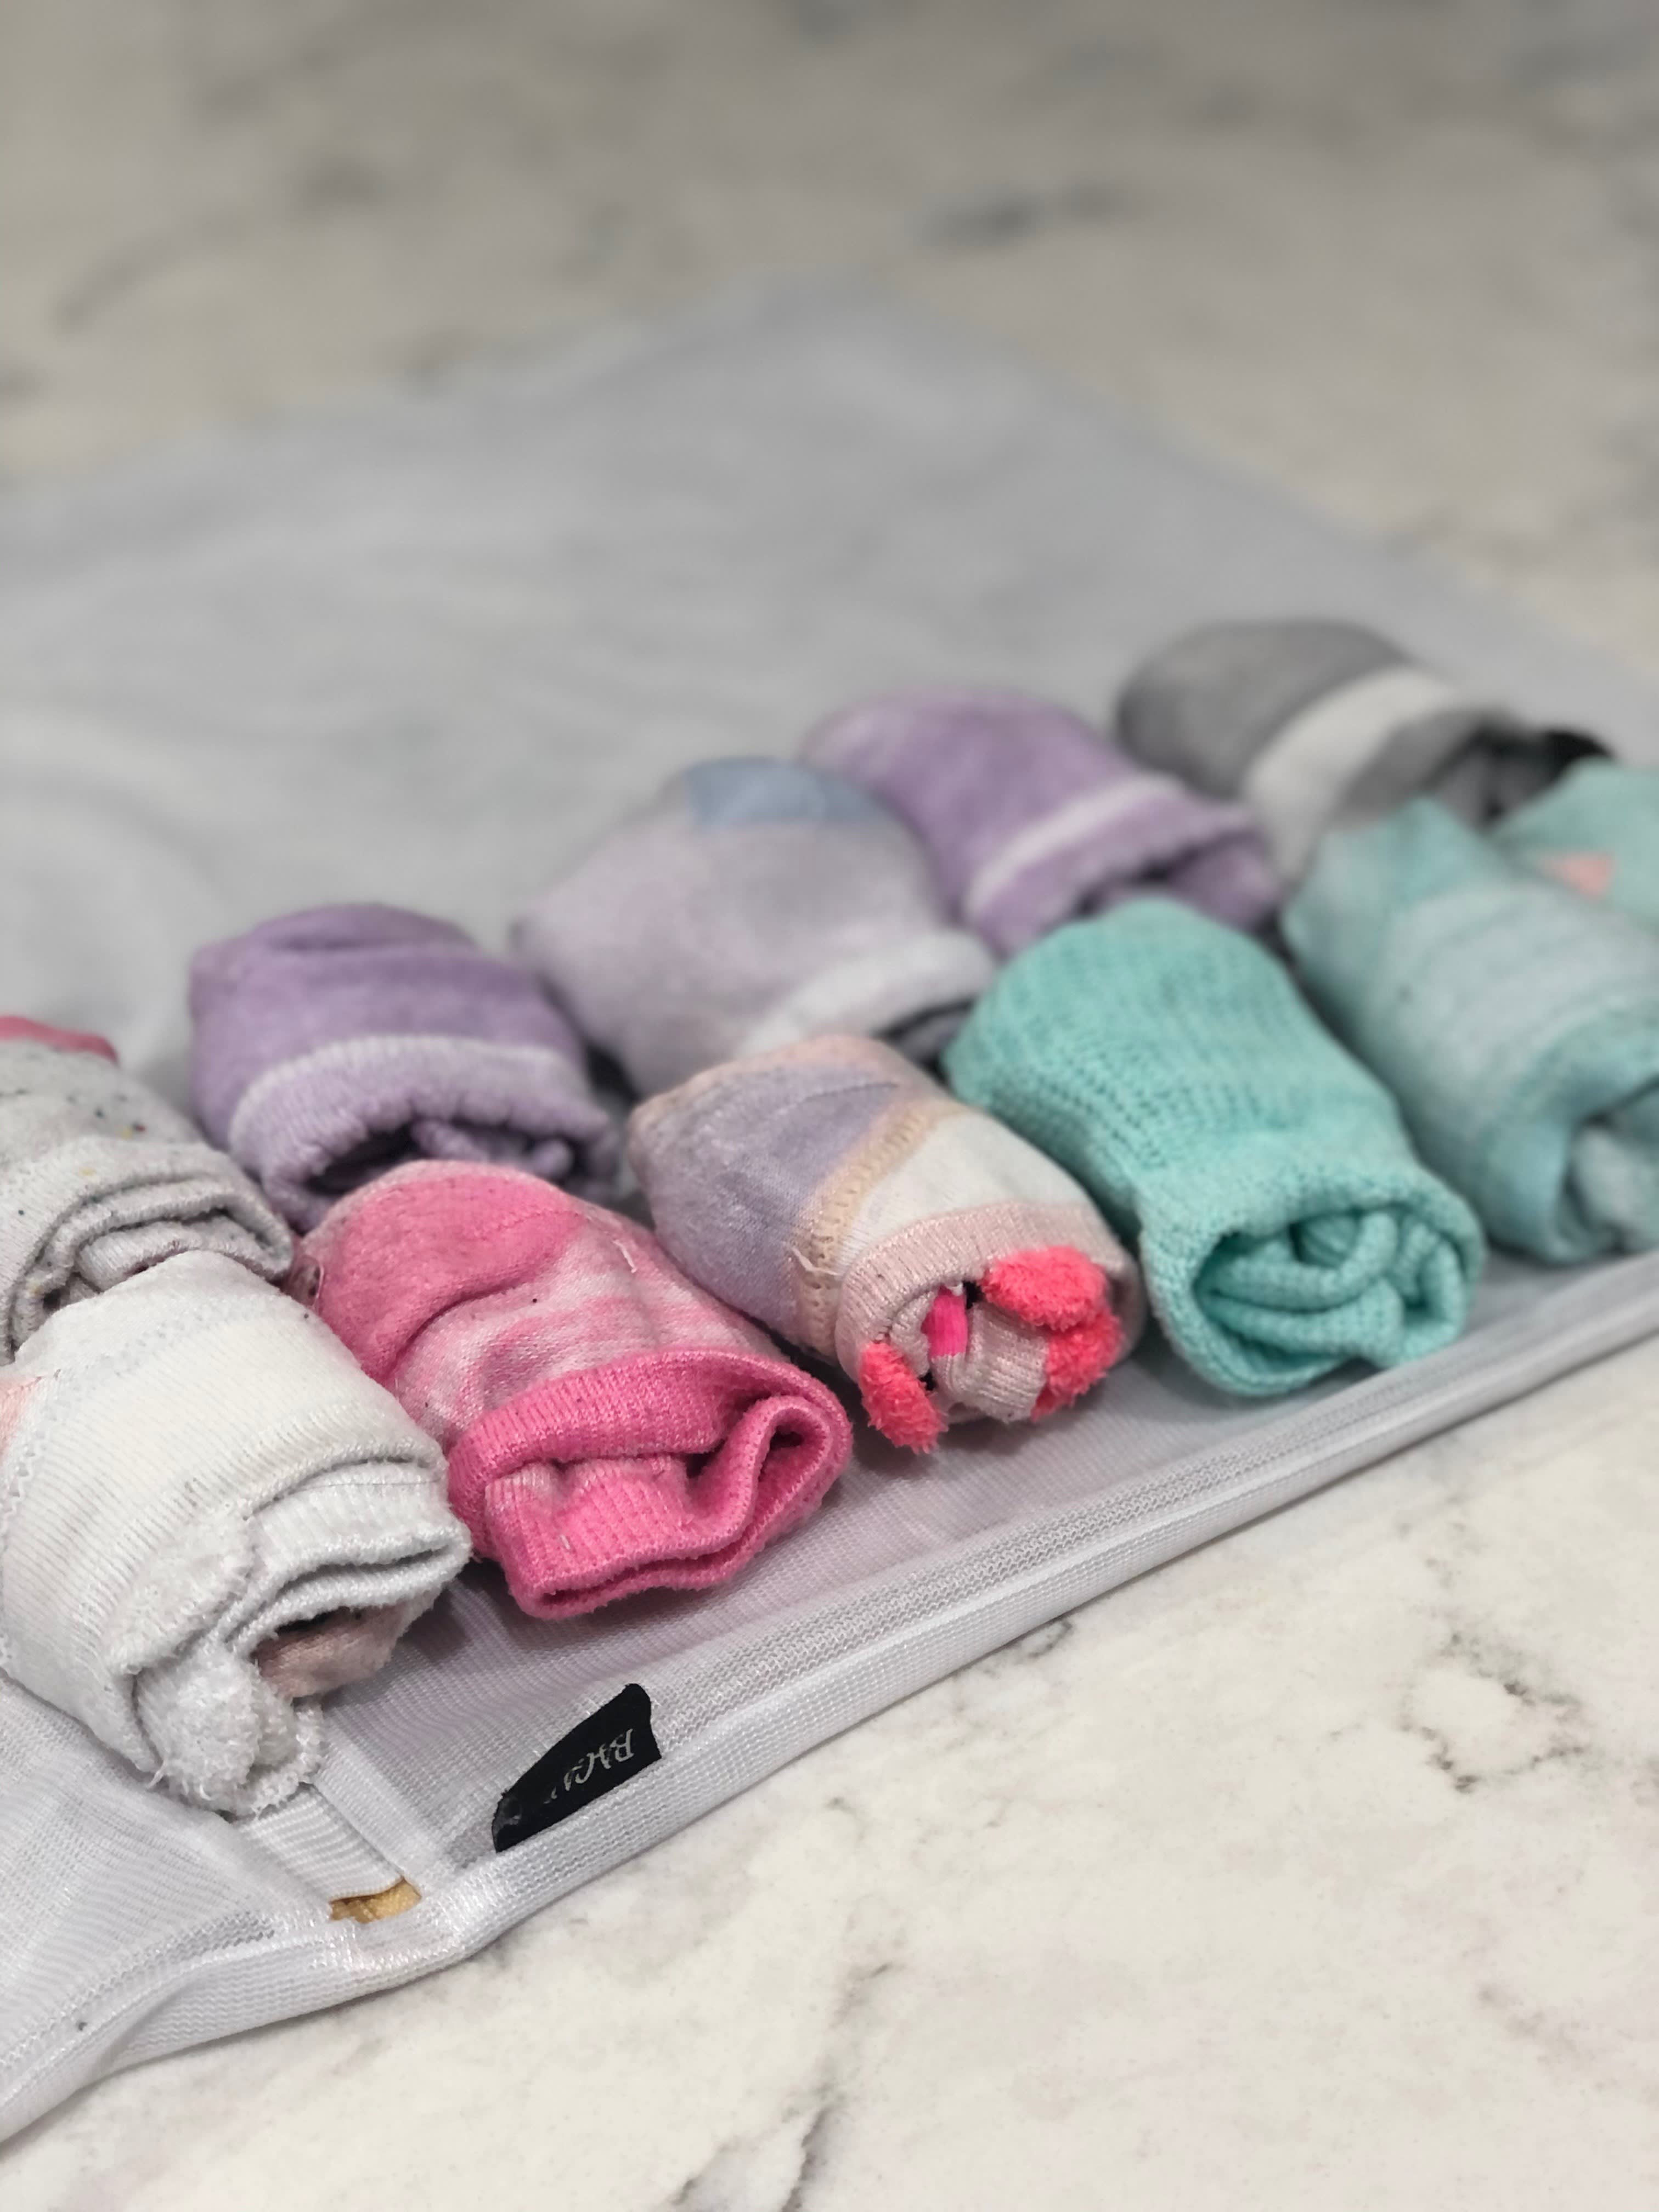 This Simple Laundry Hack Ensures You Never Lose Socks Again